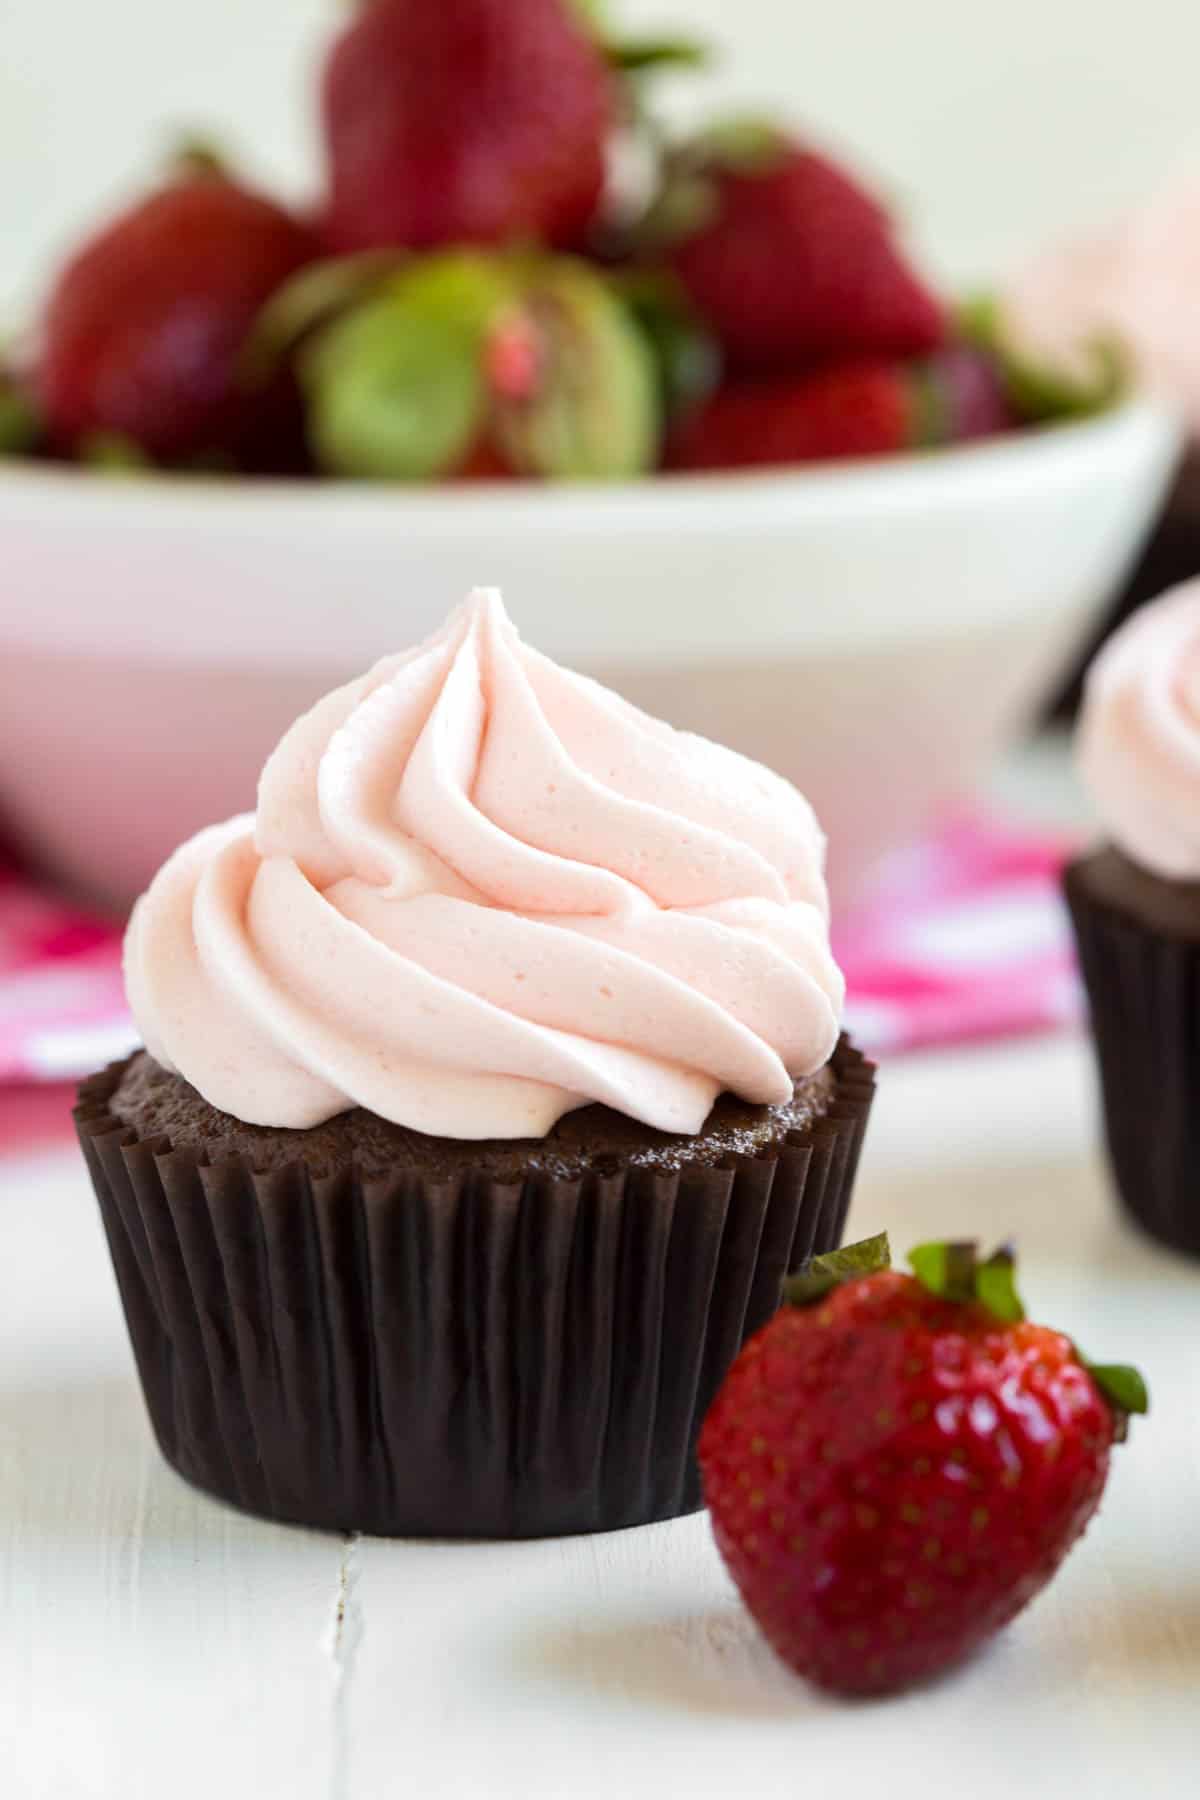 one chocolate strawberry cupcake sitting in front of a bowl of strawberries